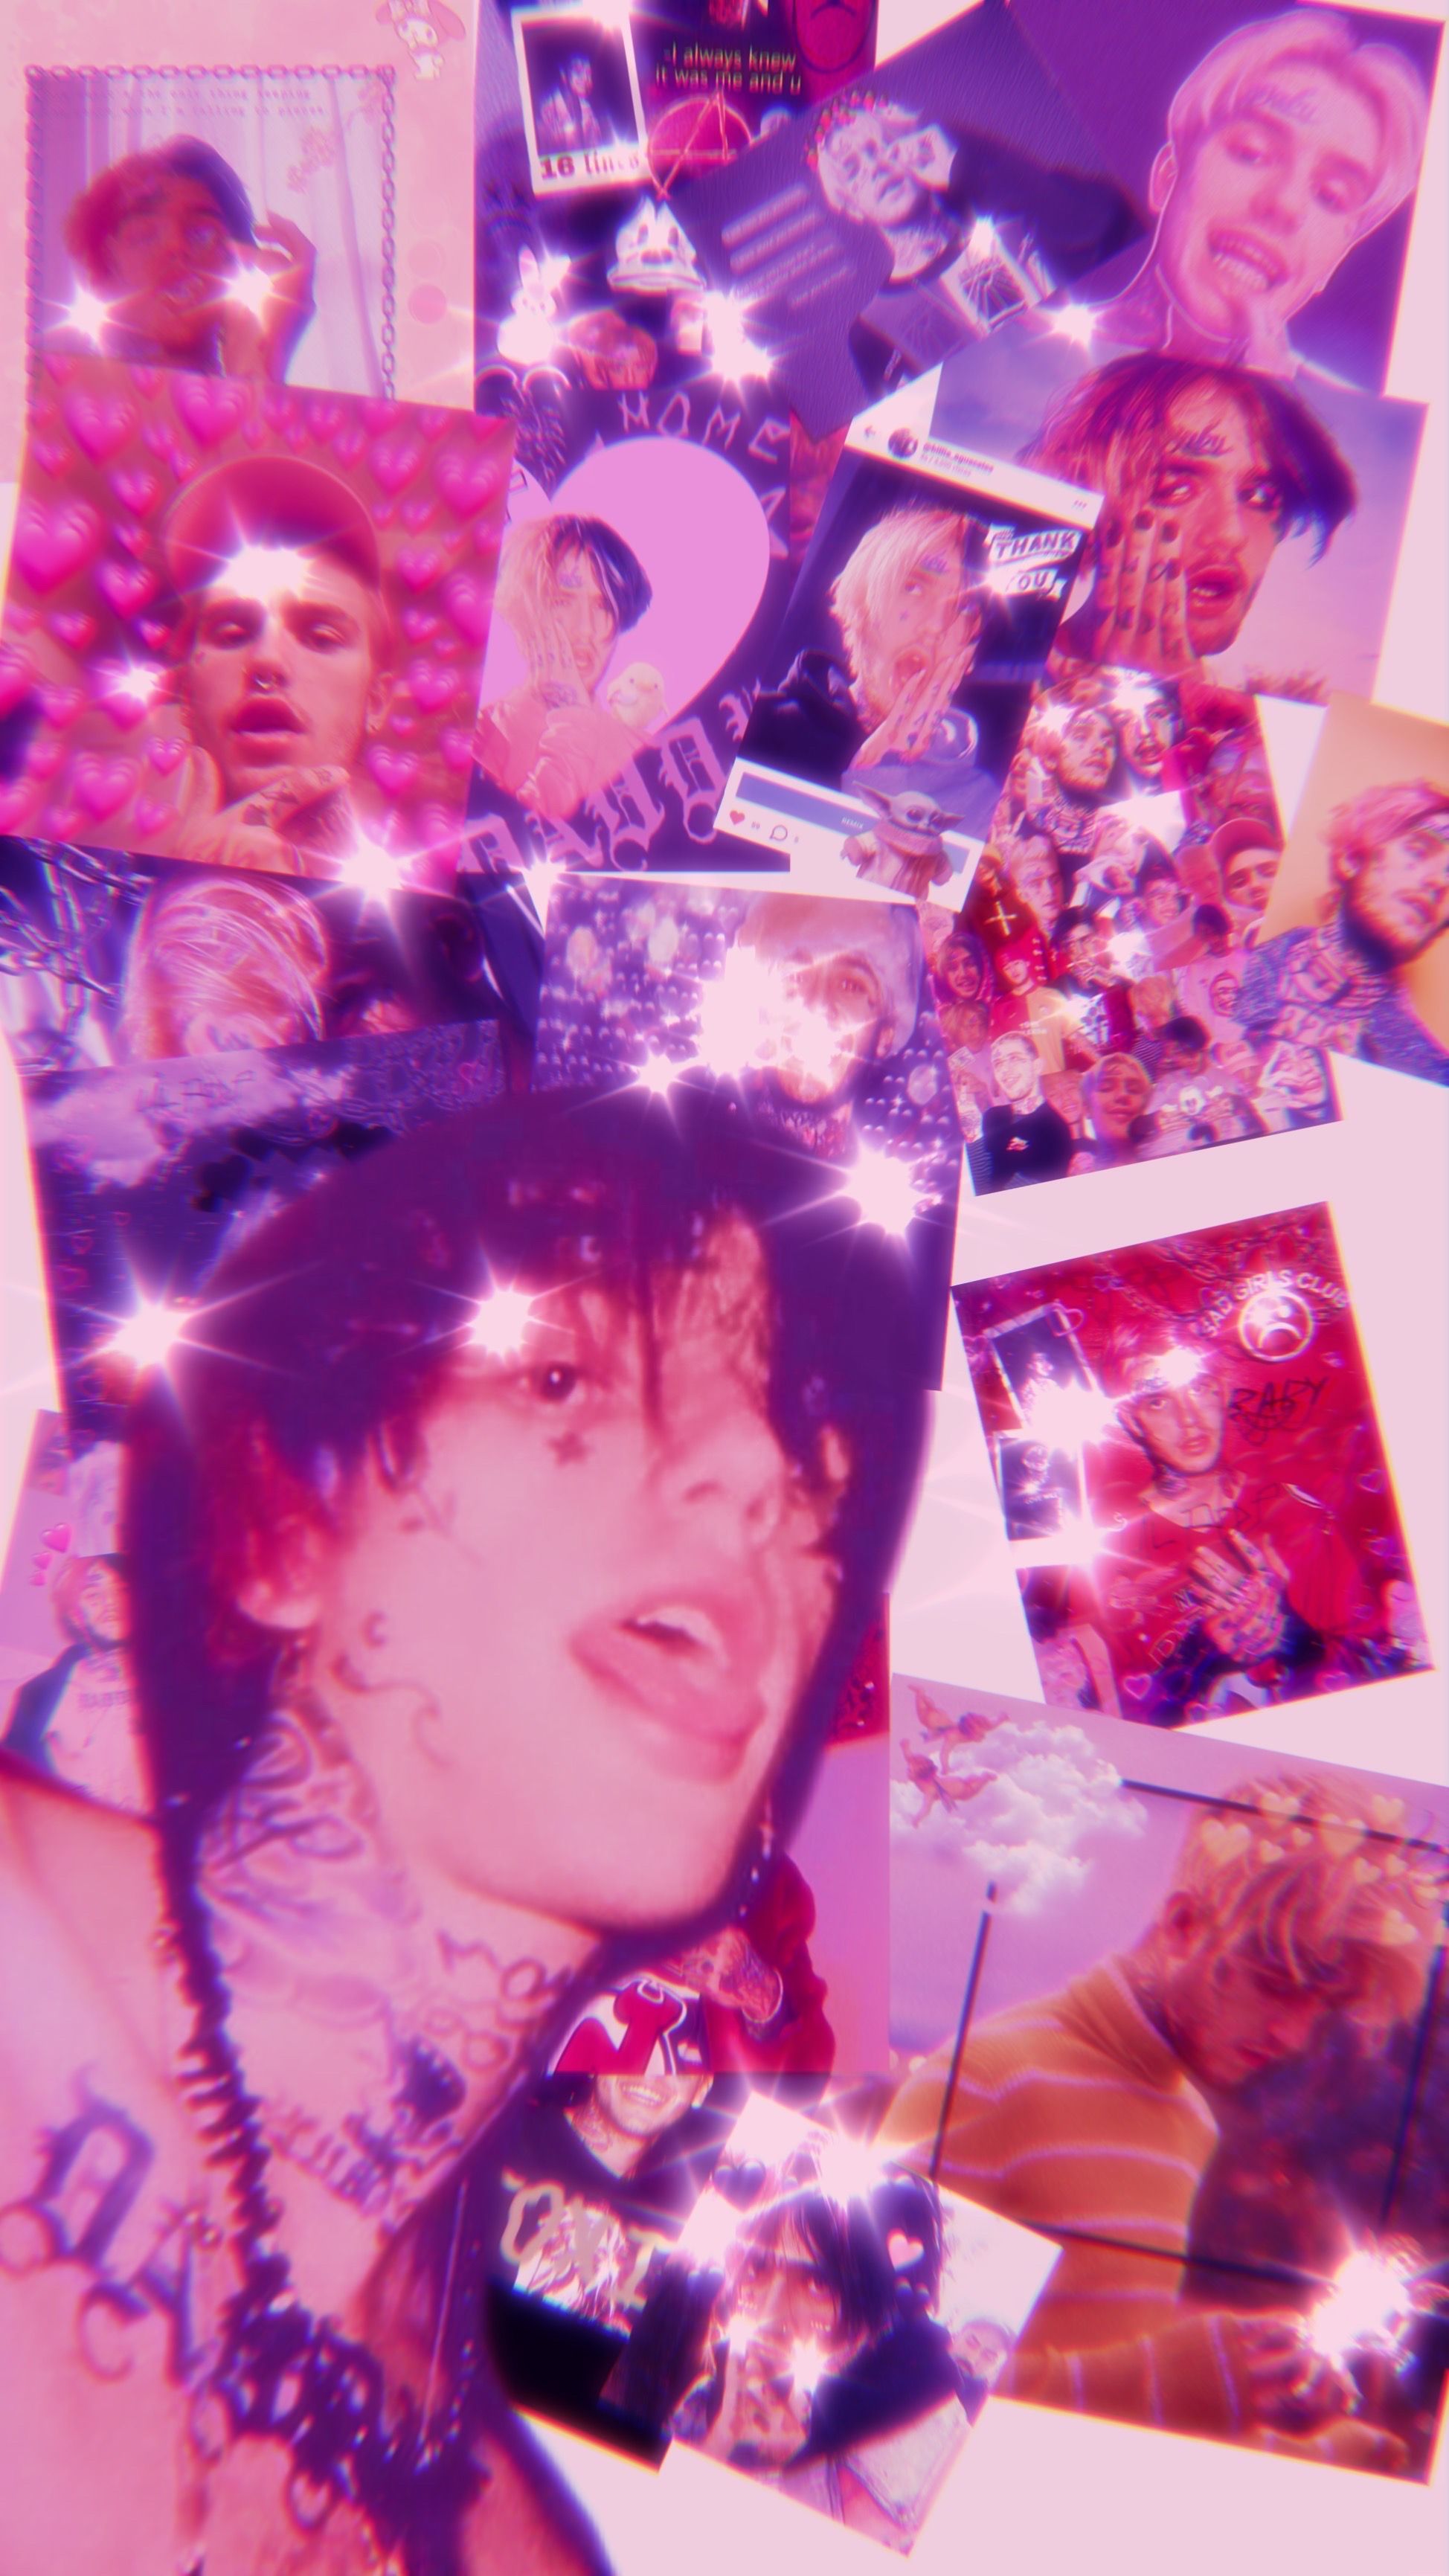 Collage of purple and pink images of Lil Peep, a white male with black hair and tattoos. - Lil Peep